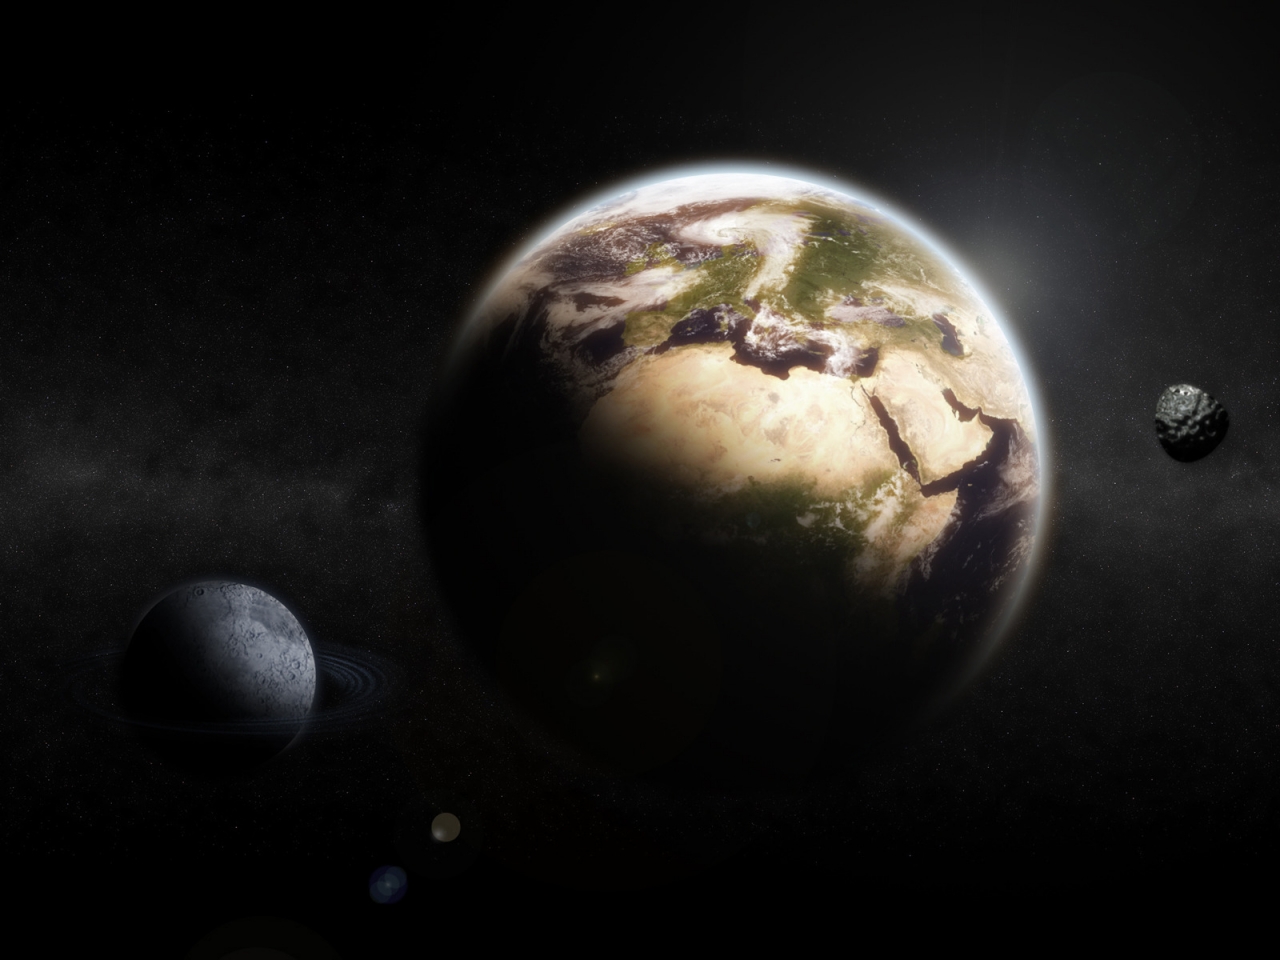 Earth & Moon for 1280 x 960 resolution